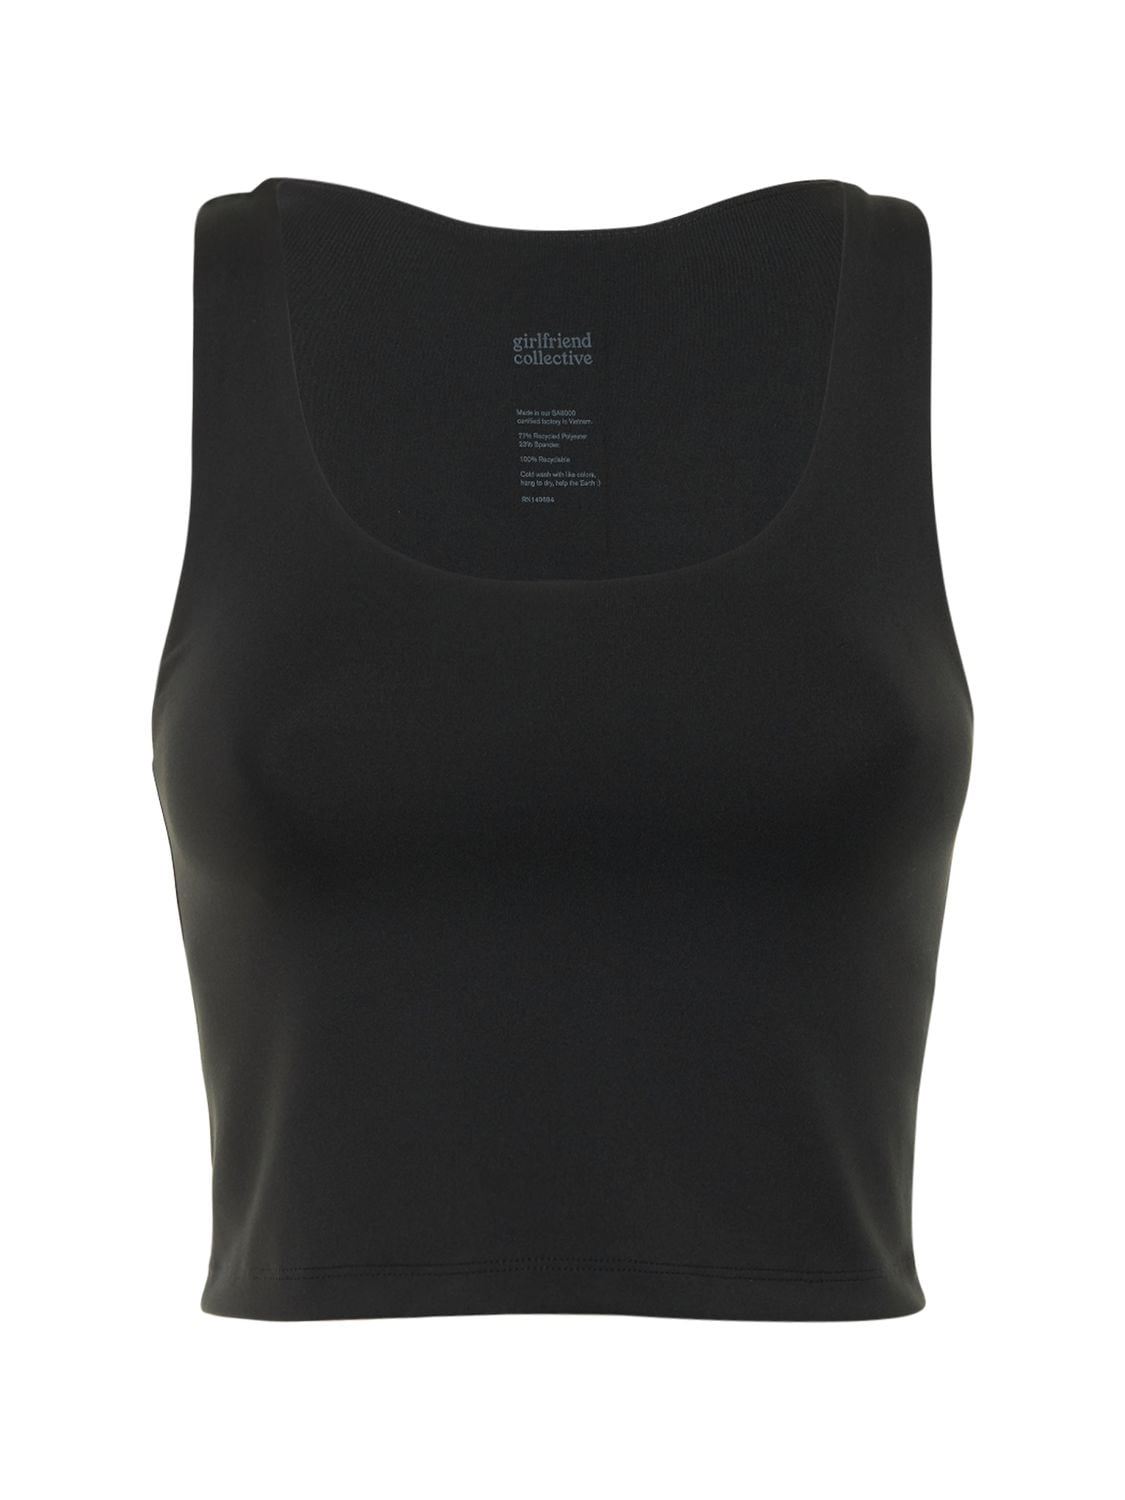 Girlfriend Collective Luxe Scoop Stretch Tech Tank Top